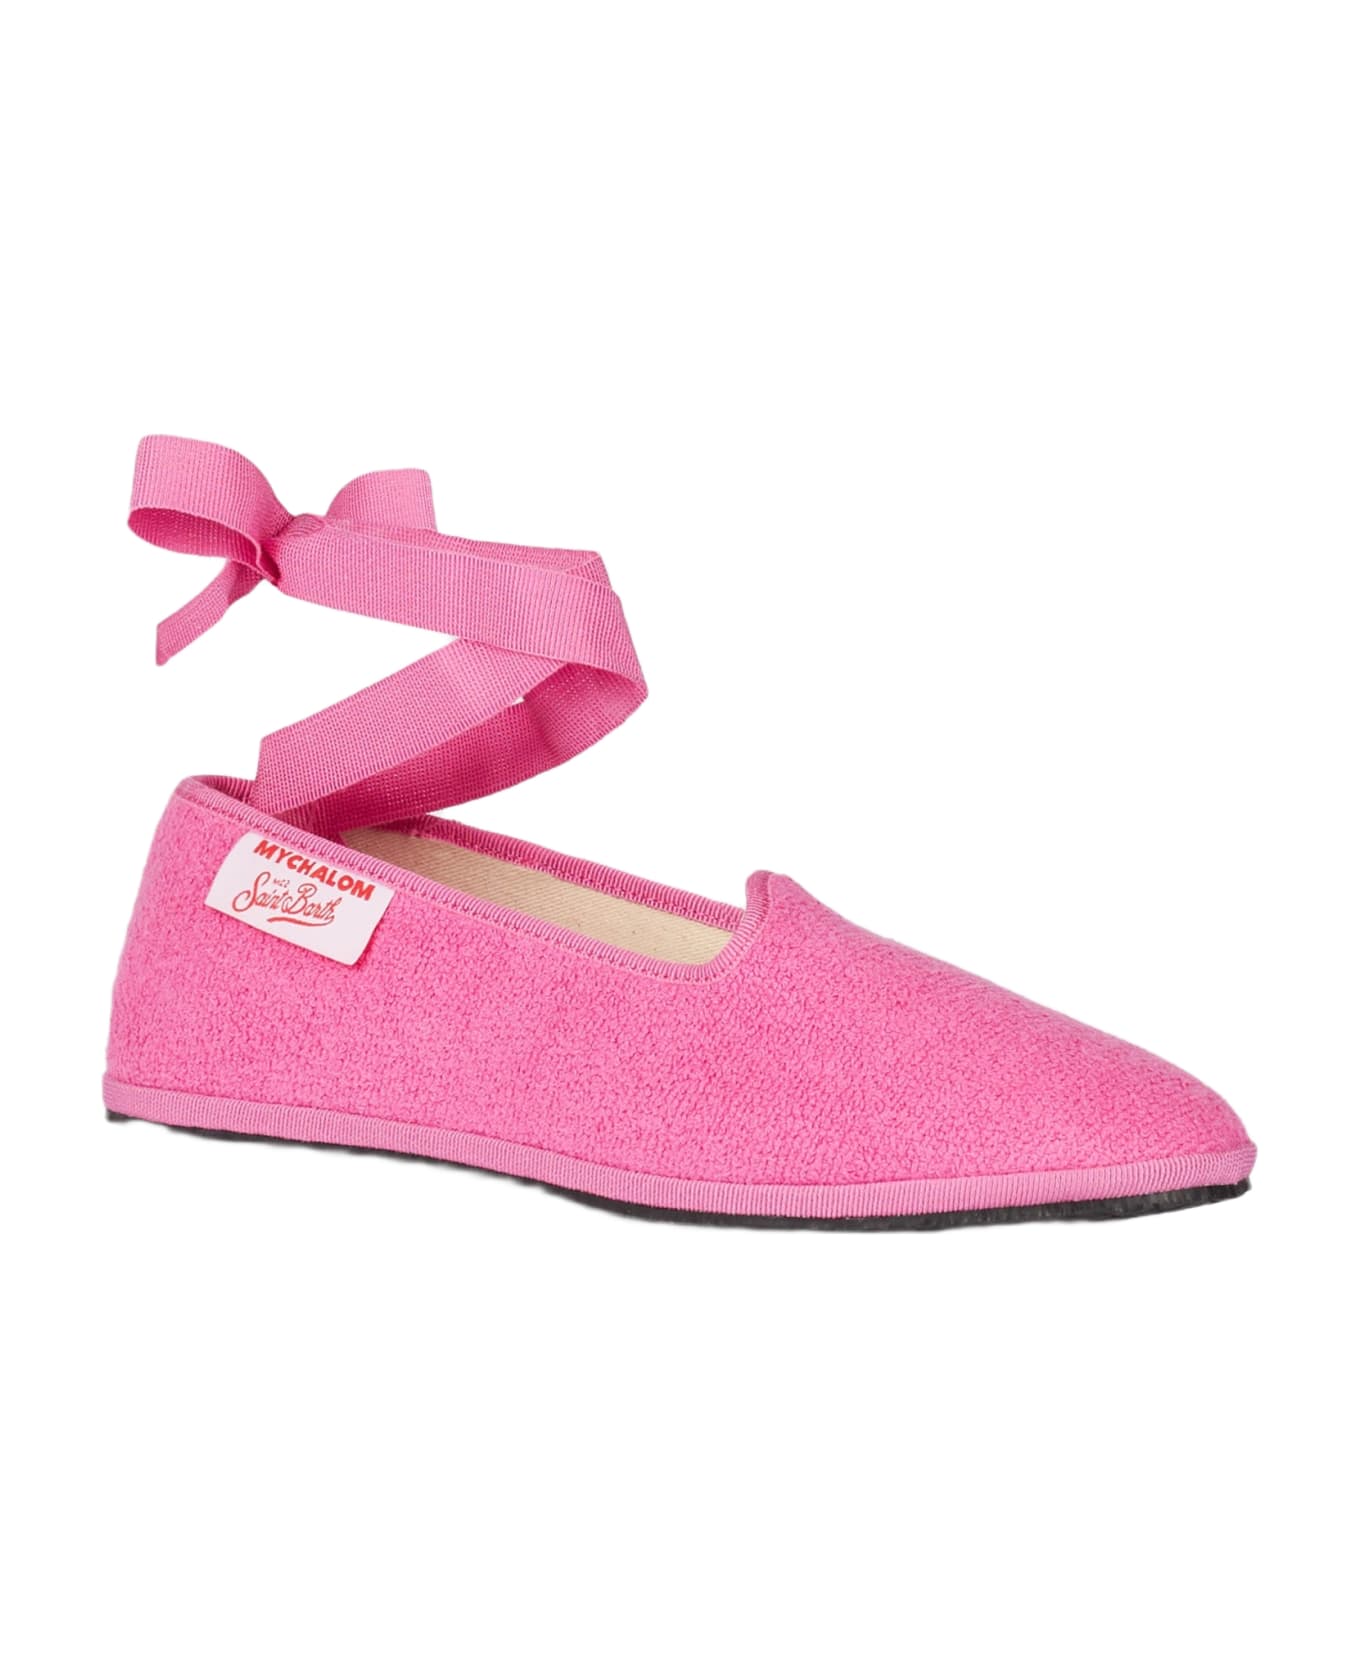 MC2 Saint Barth Woman Pink Terry Slipper Loafer | My Chalom Special Edition - PINK